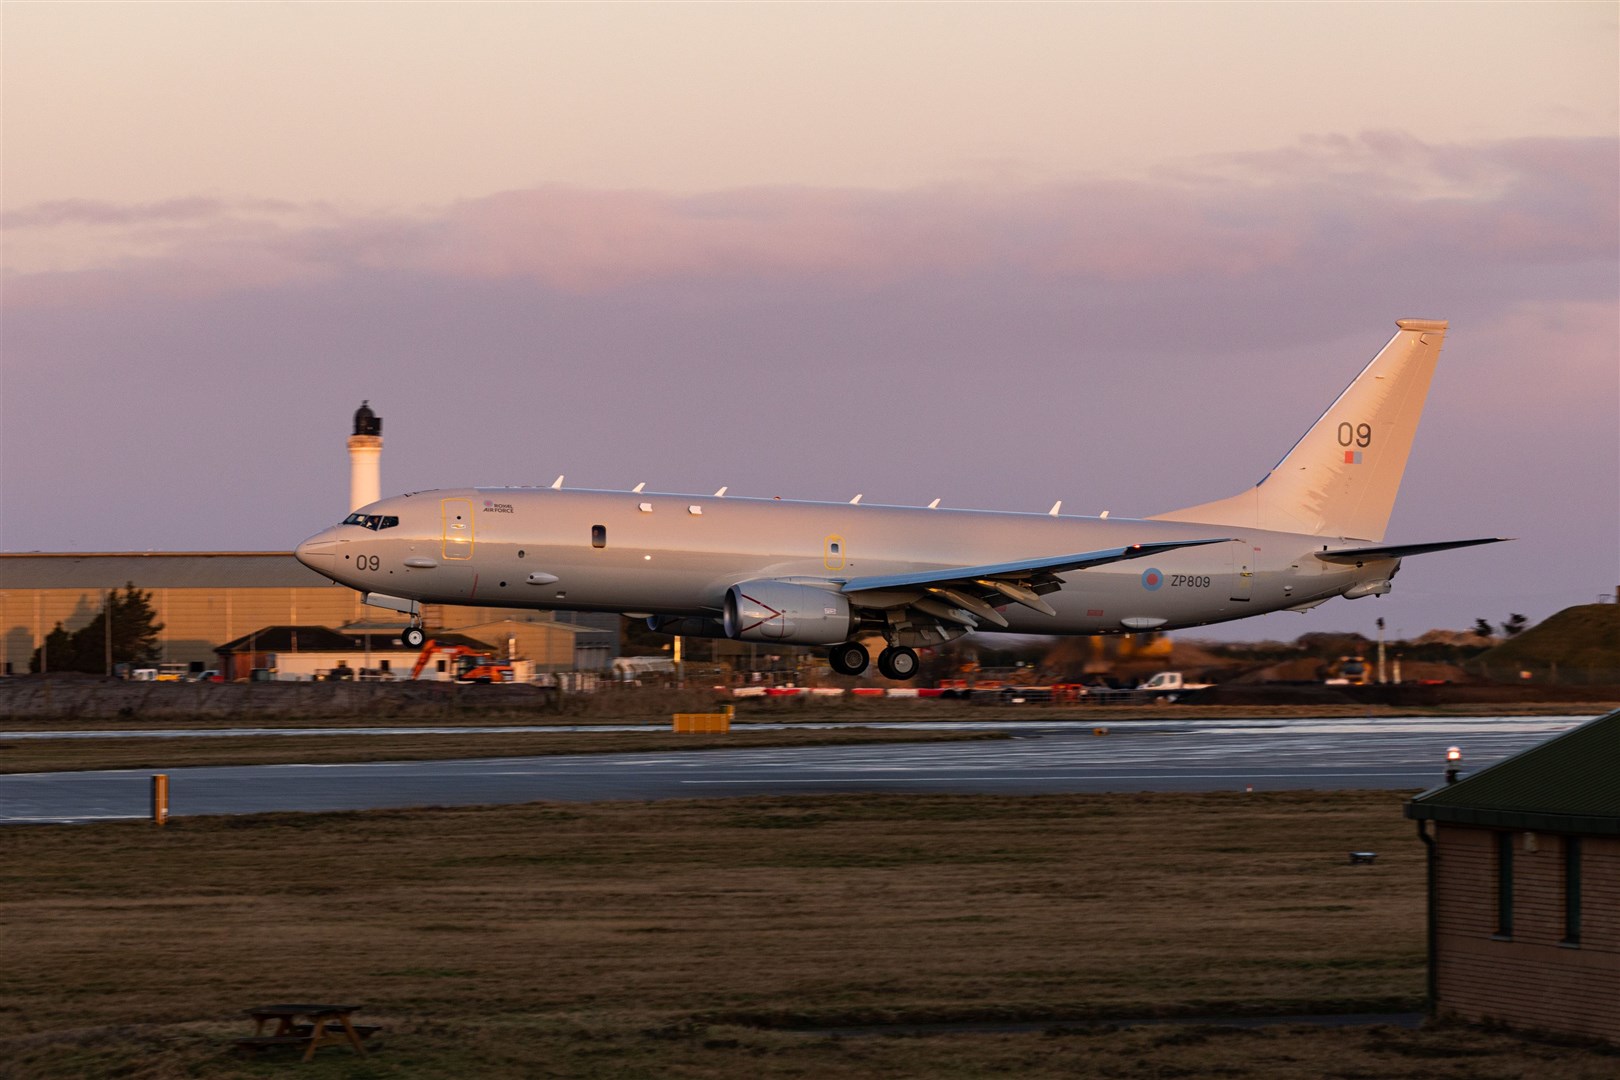 ZP809, the final Poseidon aircraft at RAF Lossiemouth, arrives to complete the P-8A fleet with a total of nine aircraft.